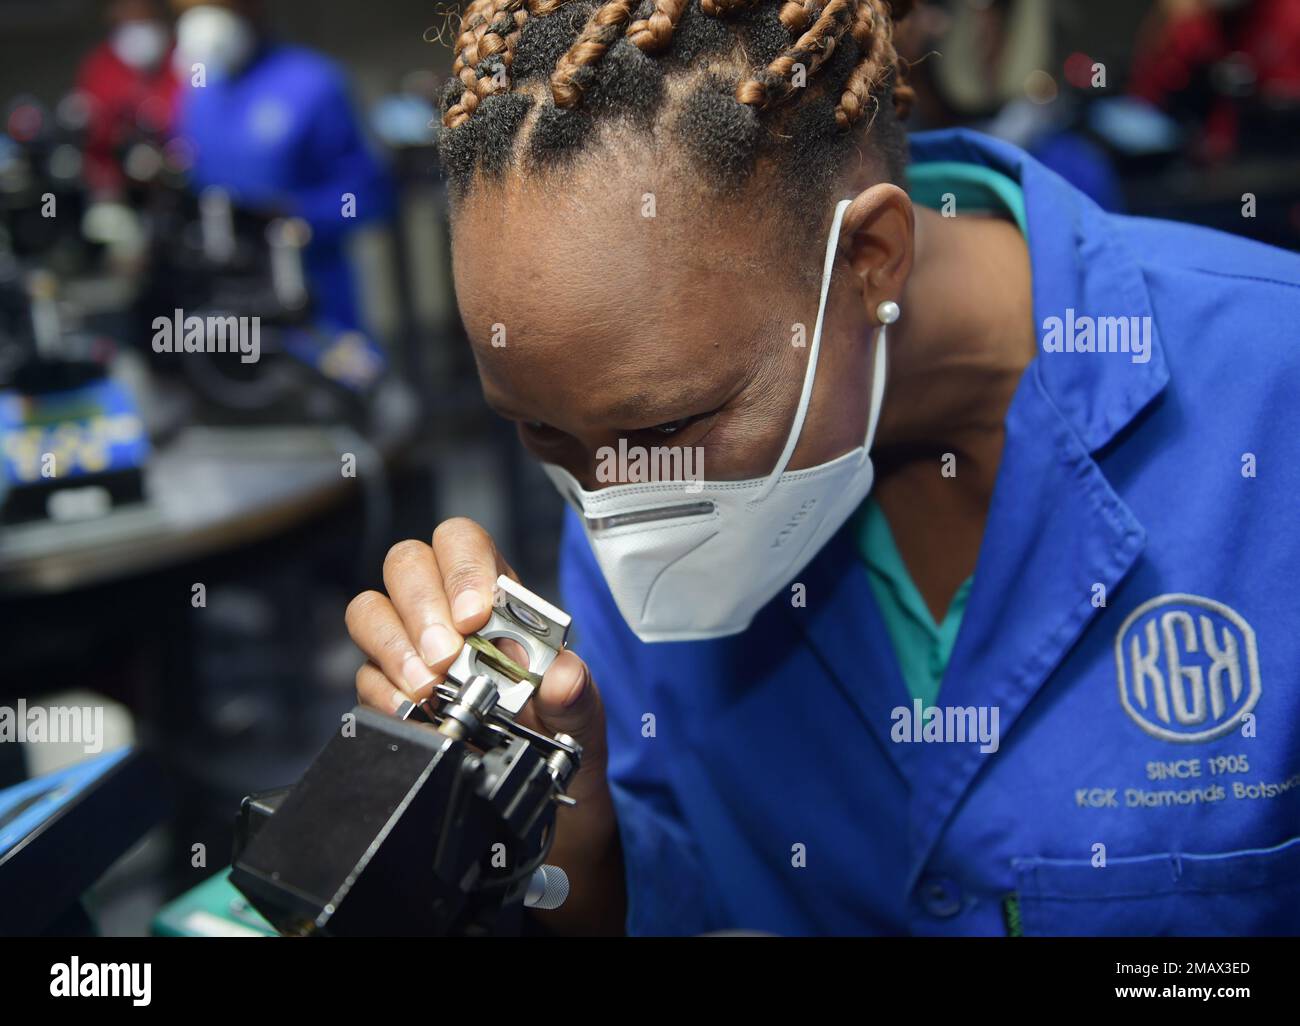 Gaborone, Botswana. 18th Jan, 2023. An employee of KGK Diamonds Botswana inspects a diamond in Gaborone, Botswana, Jan. 18, 2023. Botswanan President Mokgweetsi Masisi said Wednesday that developing raw materials value chains allows for innovation and builds sustainability, particularly in the diamond industry. TO GO WITH 'Botswanan president says diamond value chains critical to Botswana's economic diversification' Credit: Tshekiso Tebalo/Xinhua/Alamy Live News Stock Photo